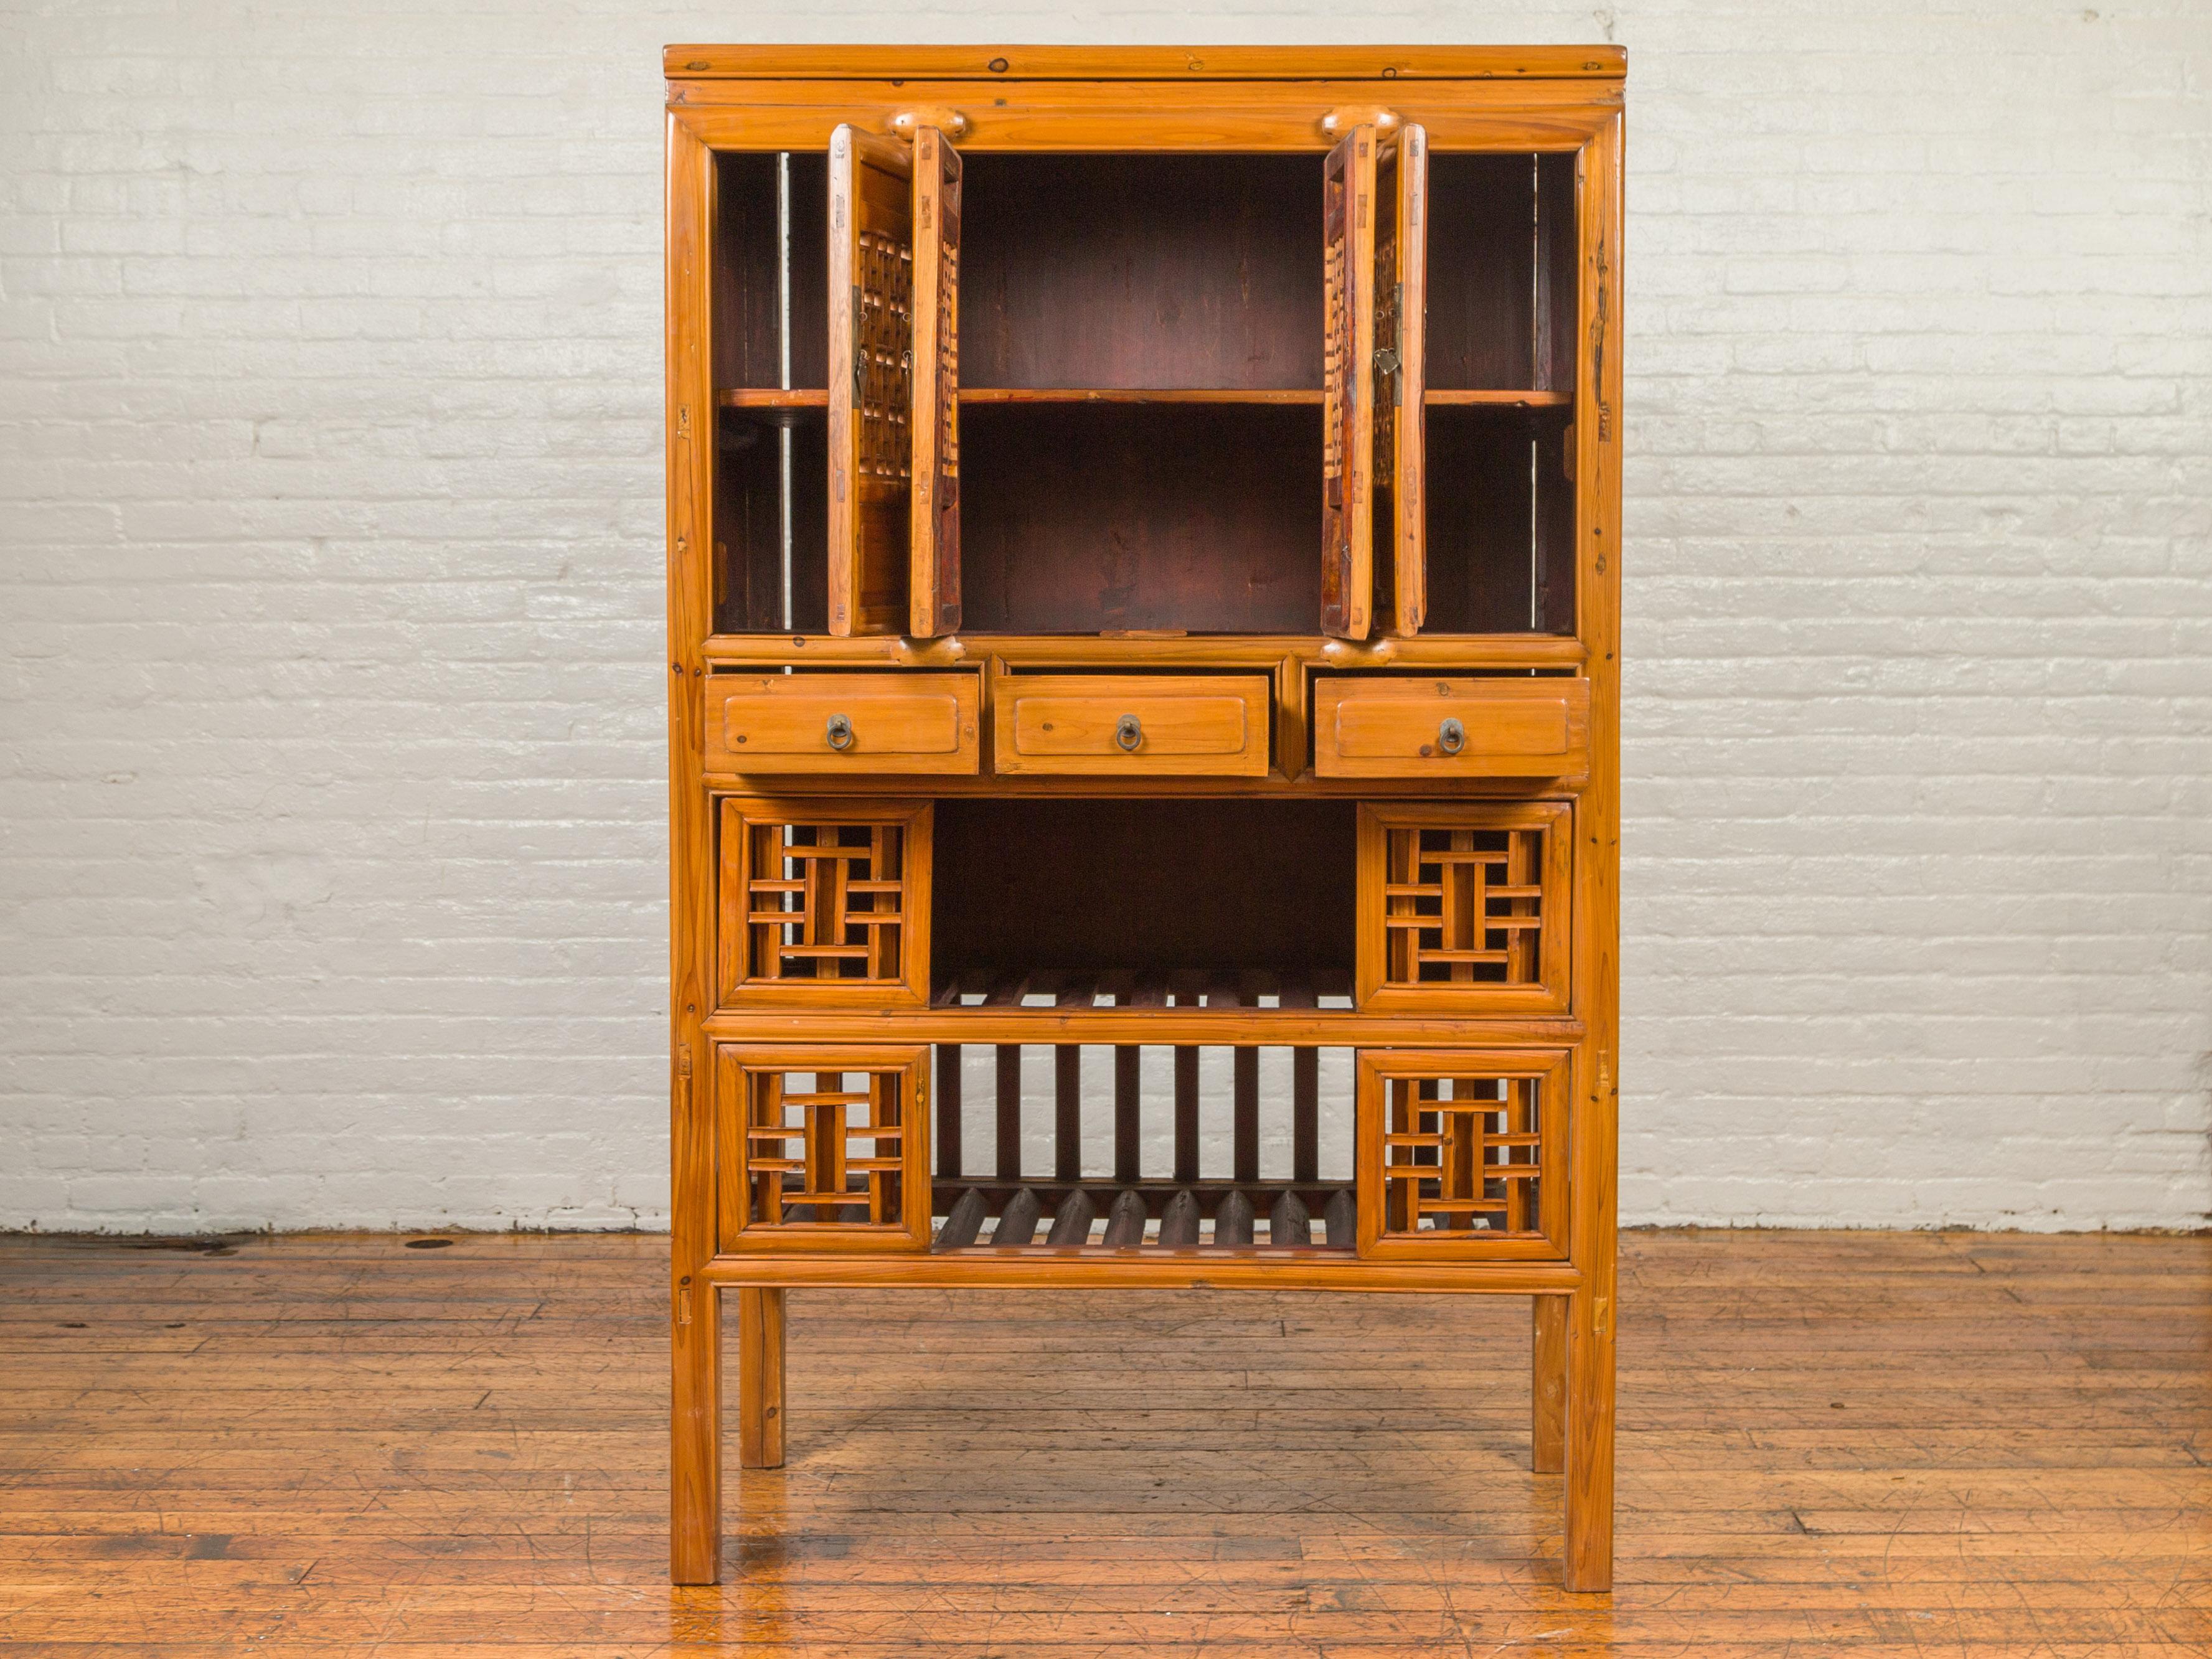 19th Century Chinese Qing Dynasty Elm Kitchen Cabinet with Fretwork Motifs and Sliding Panels